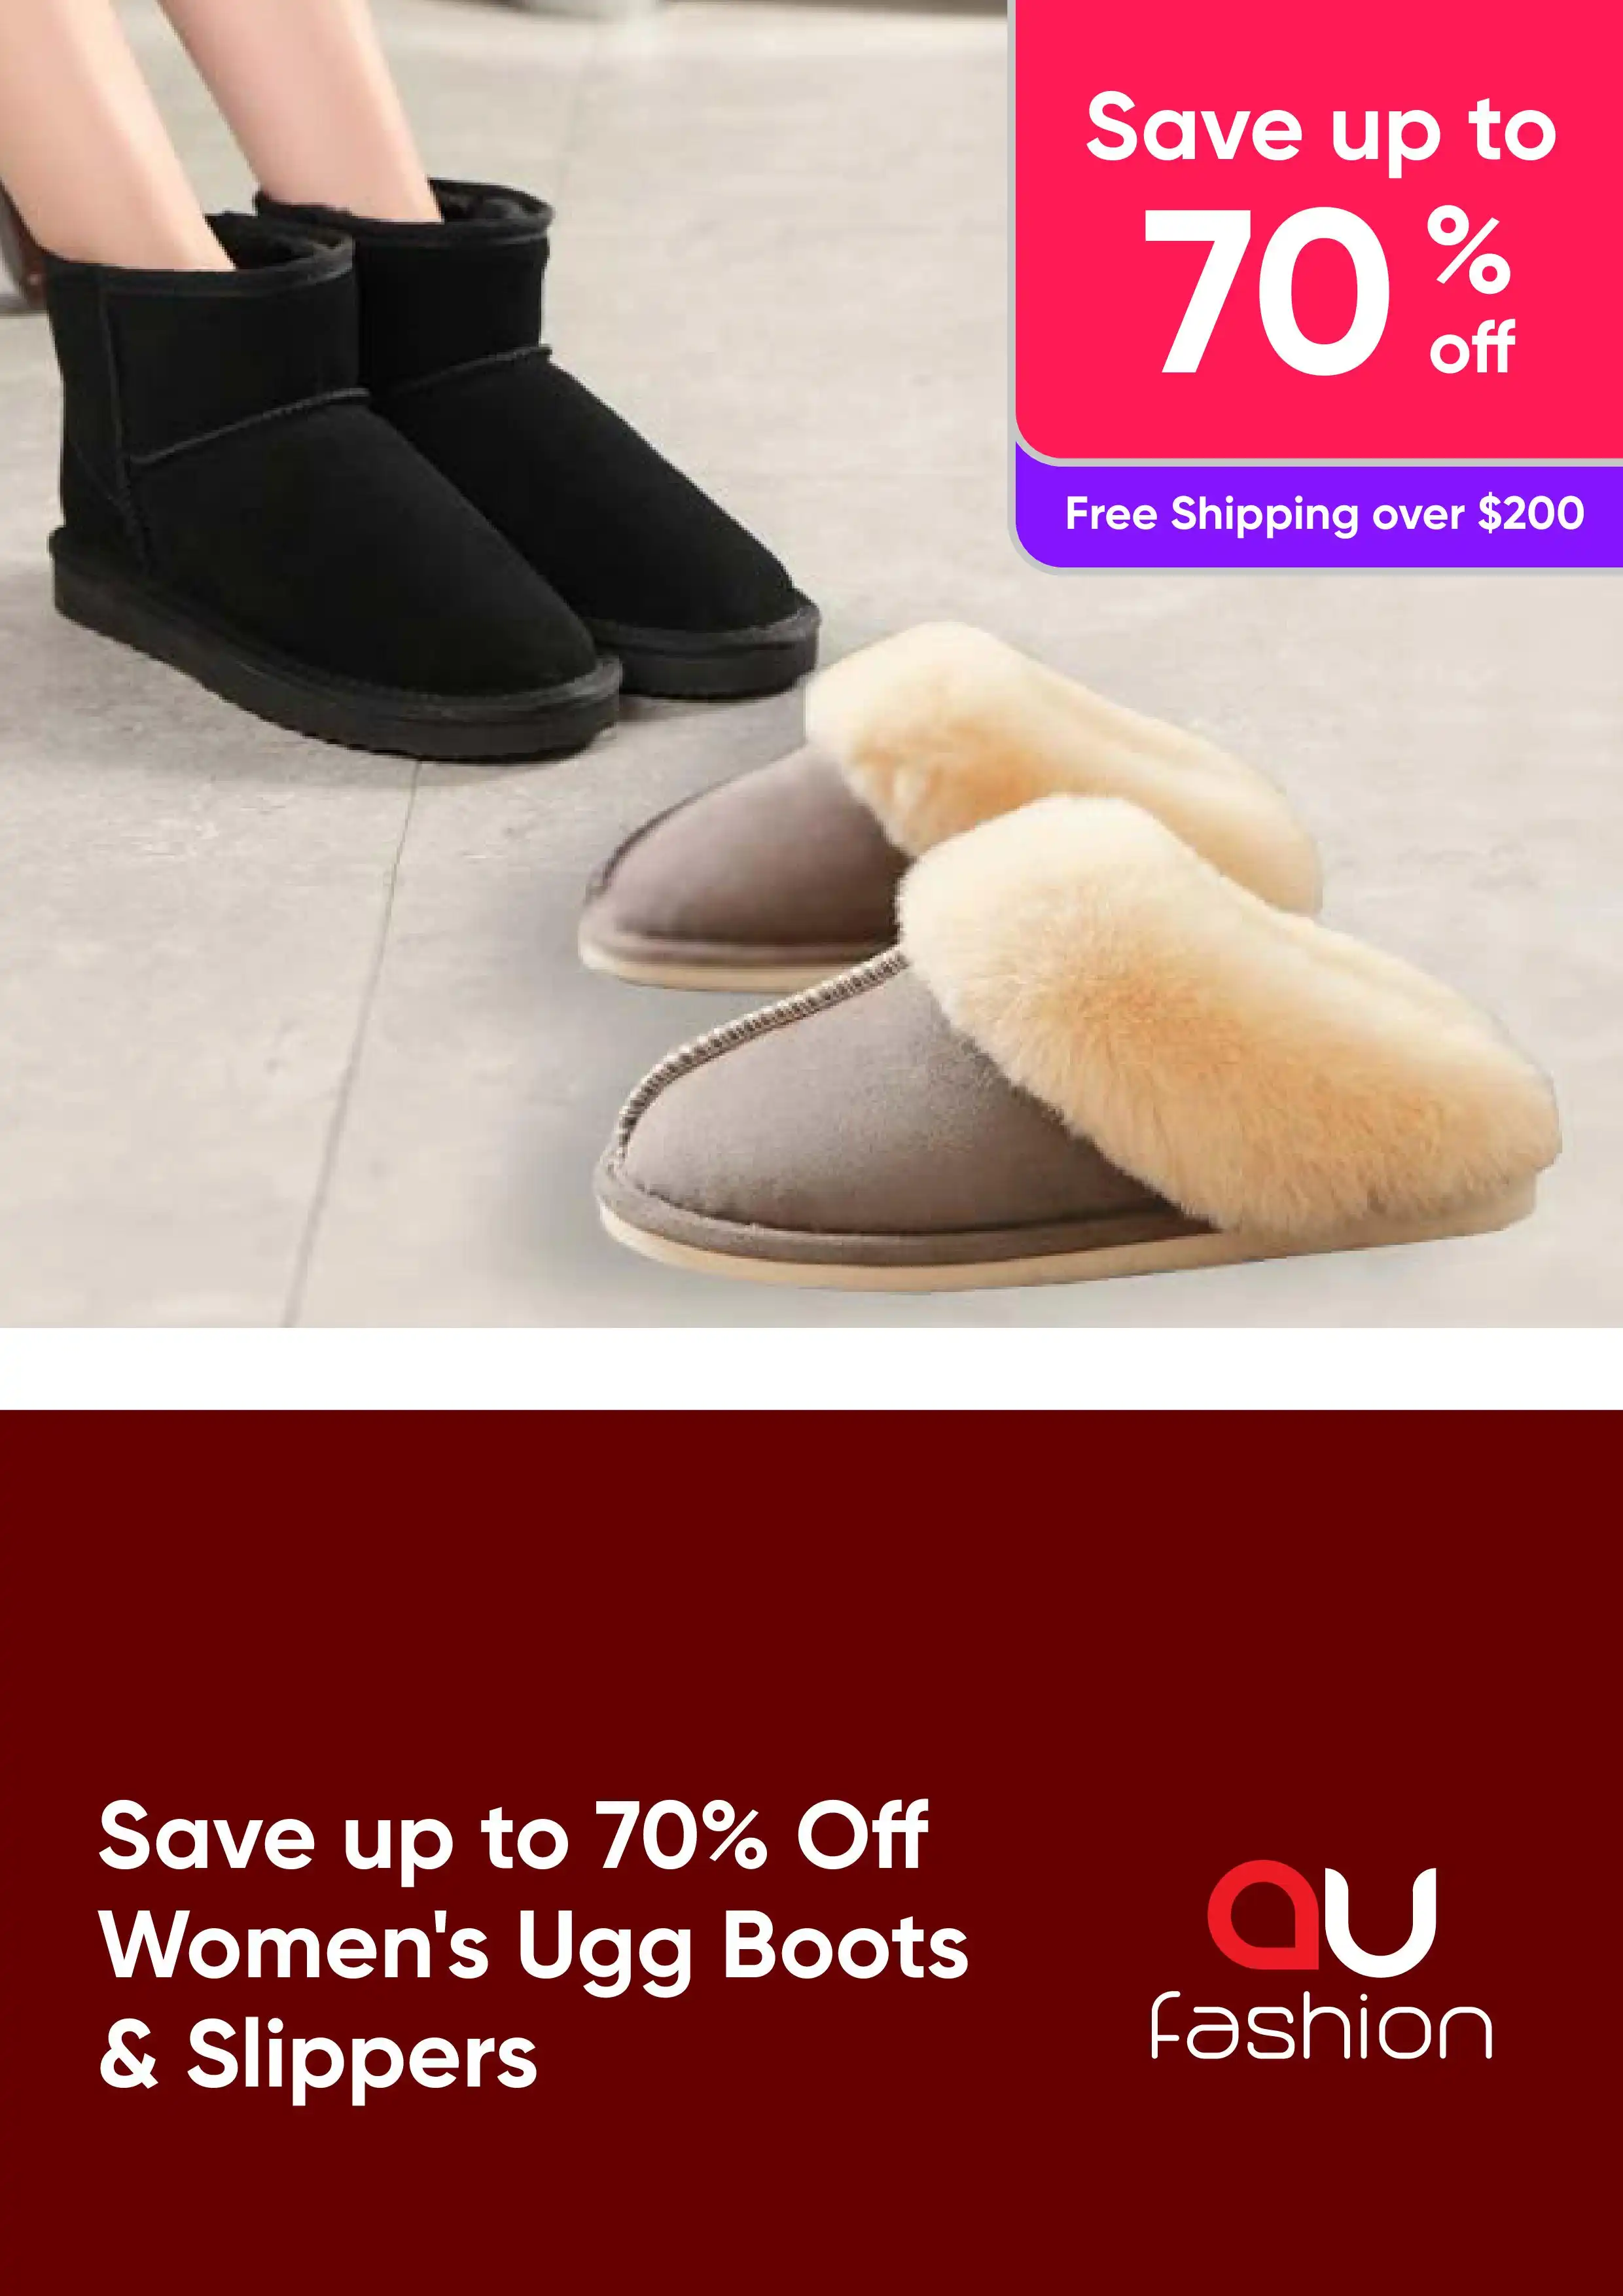 Save up to 70% Off Women's Ugg Boots & Slippers